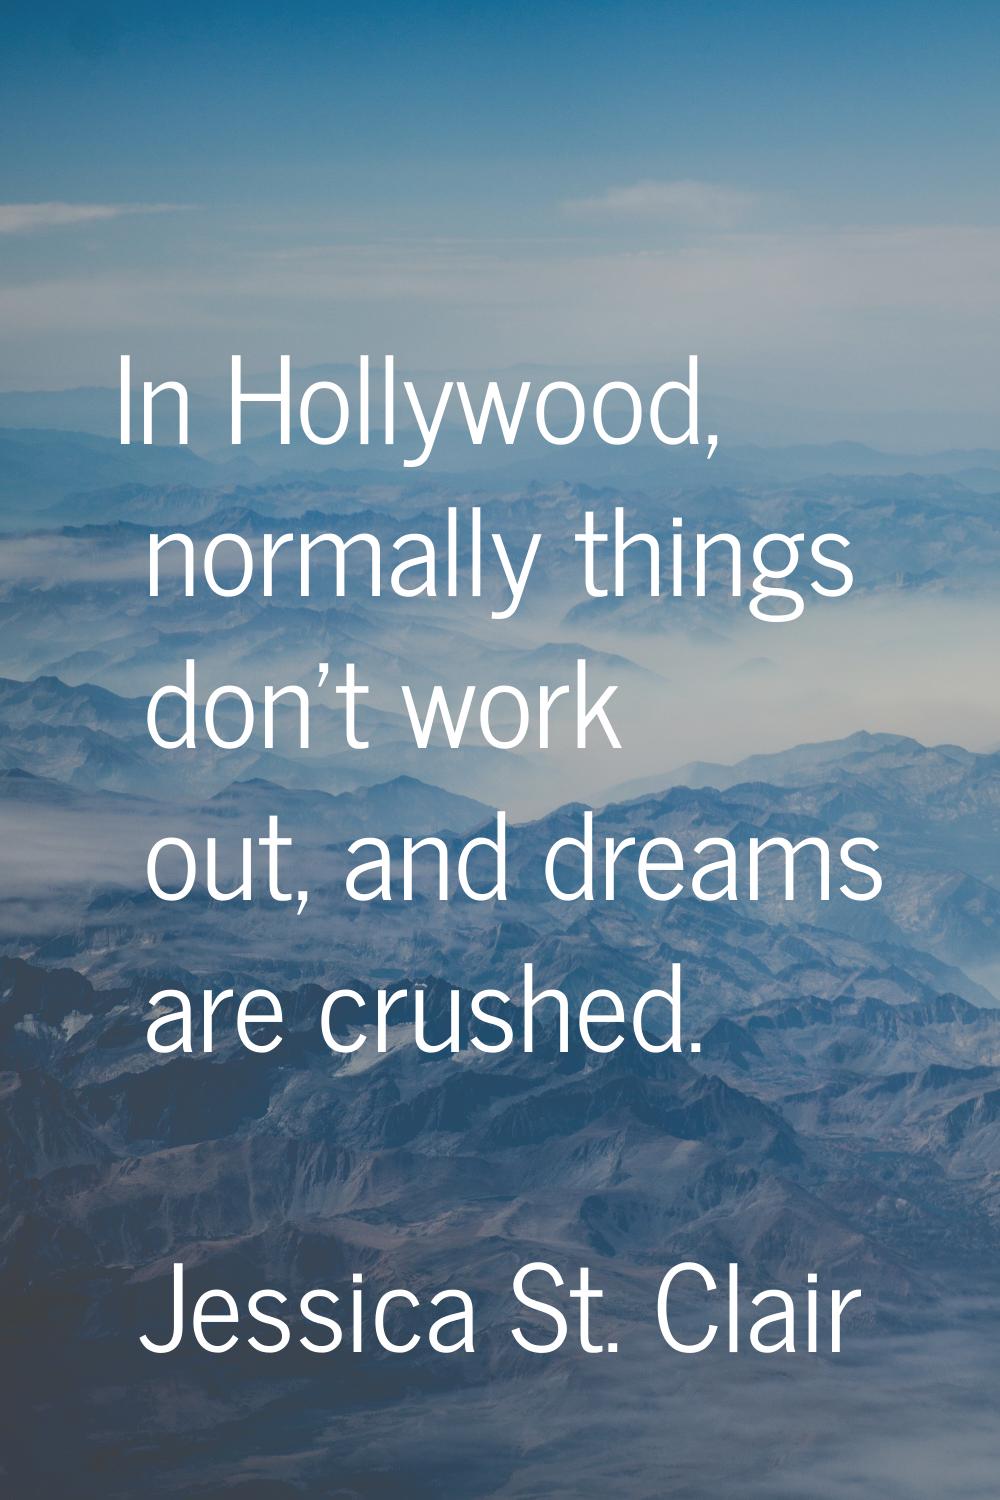 In Hollywood, normally things don't work out, and dreams are crushed.